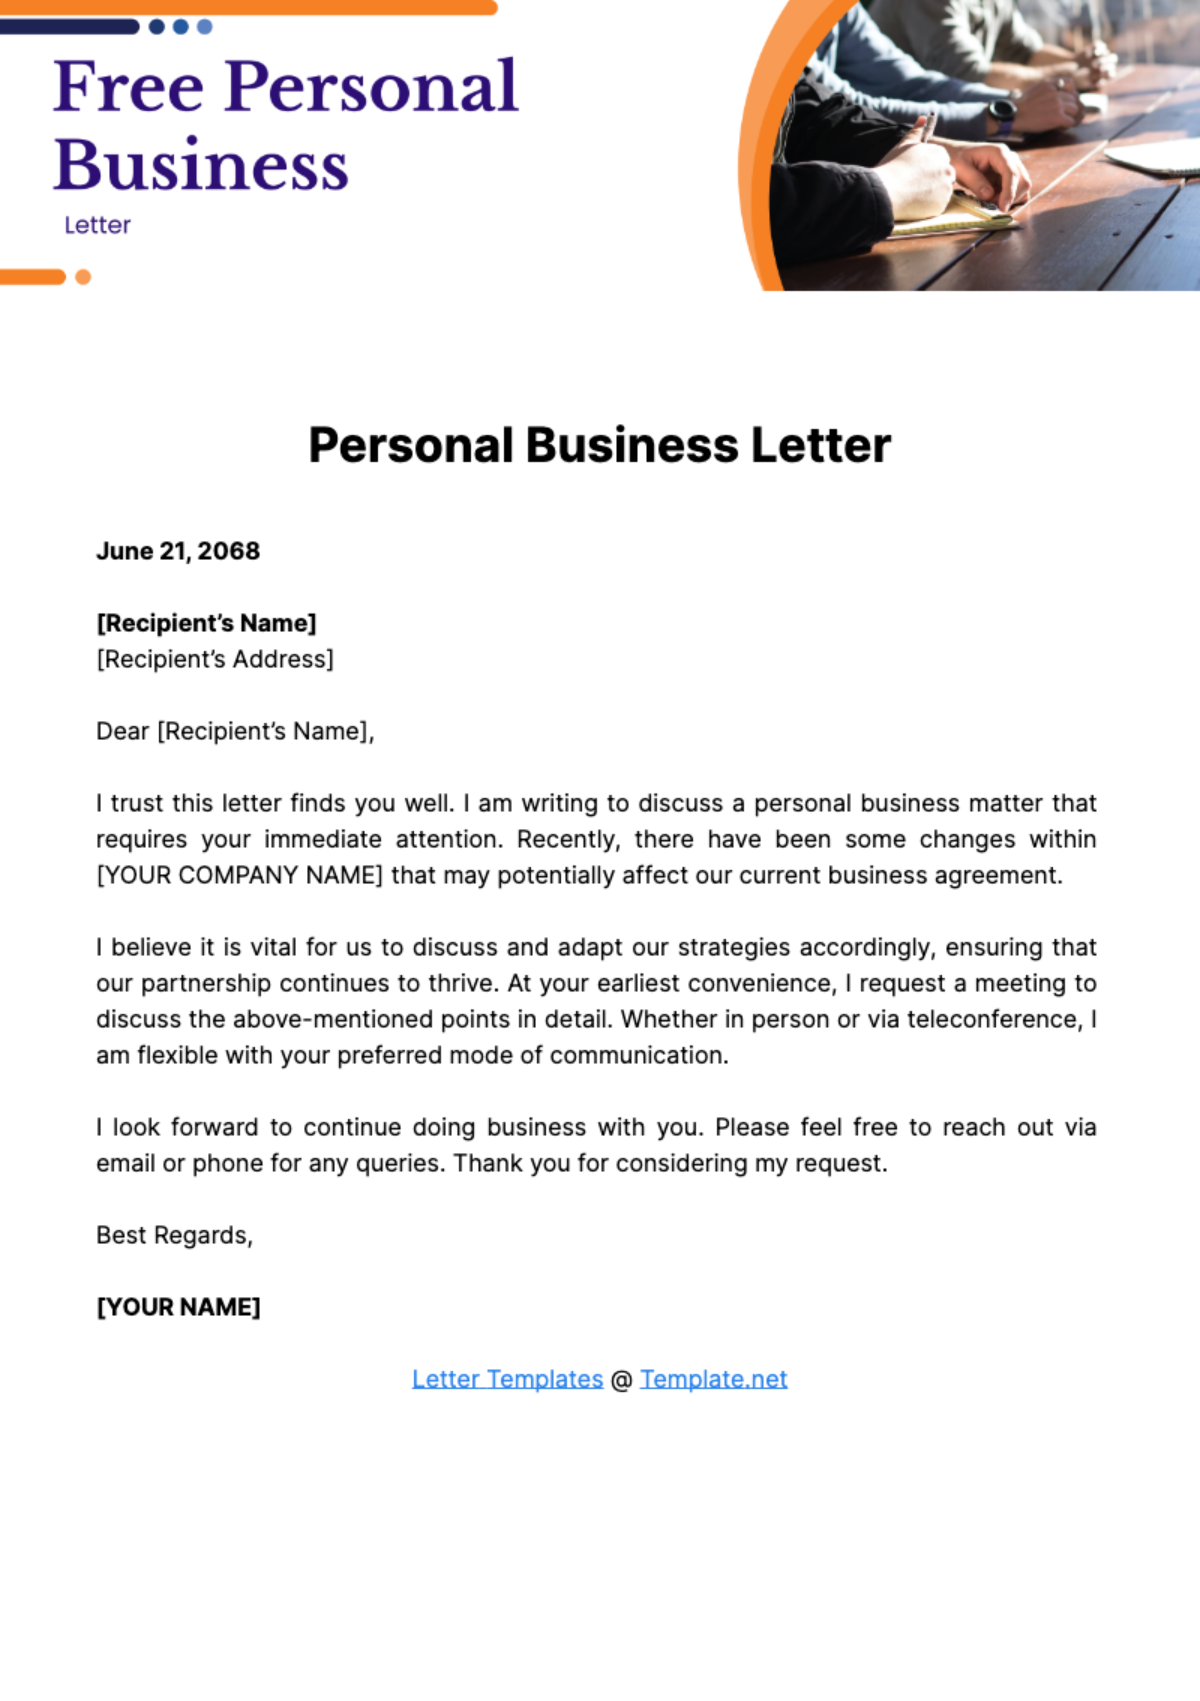 Free Personal Business Letter Template